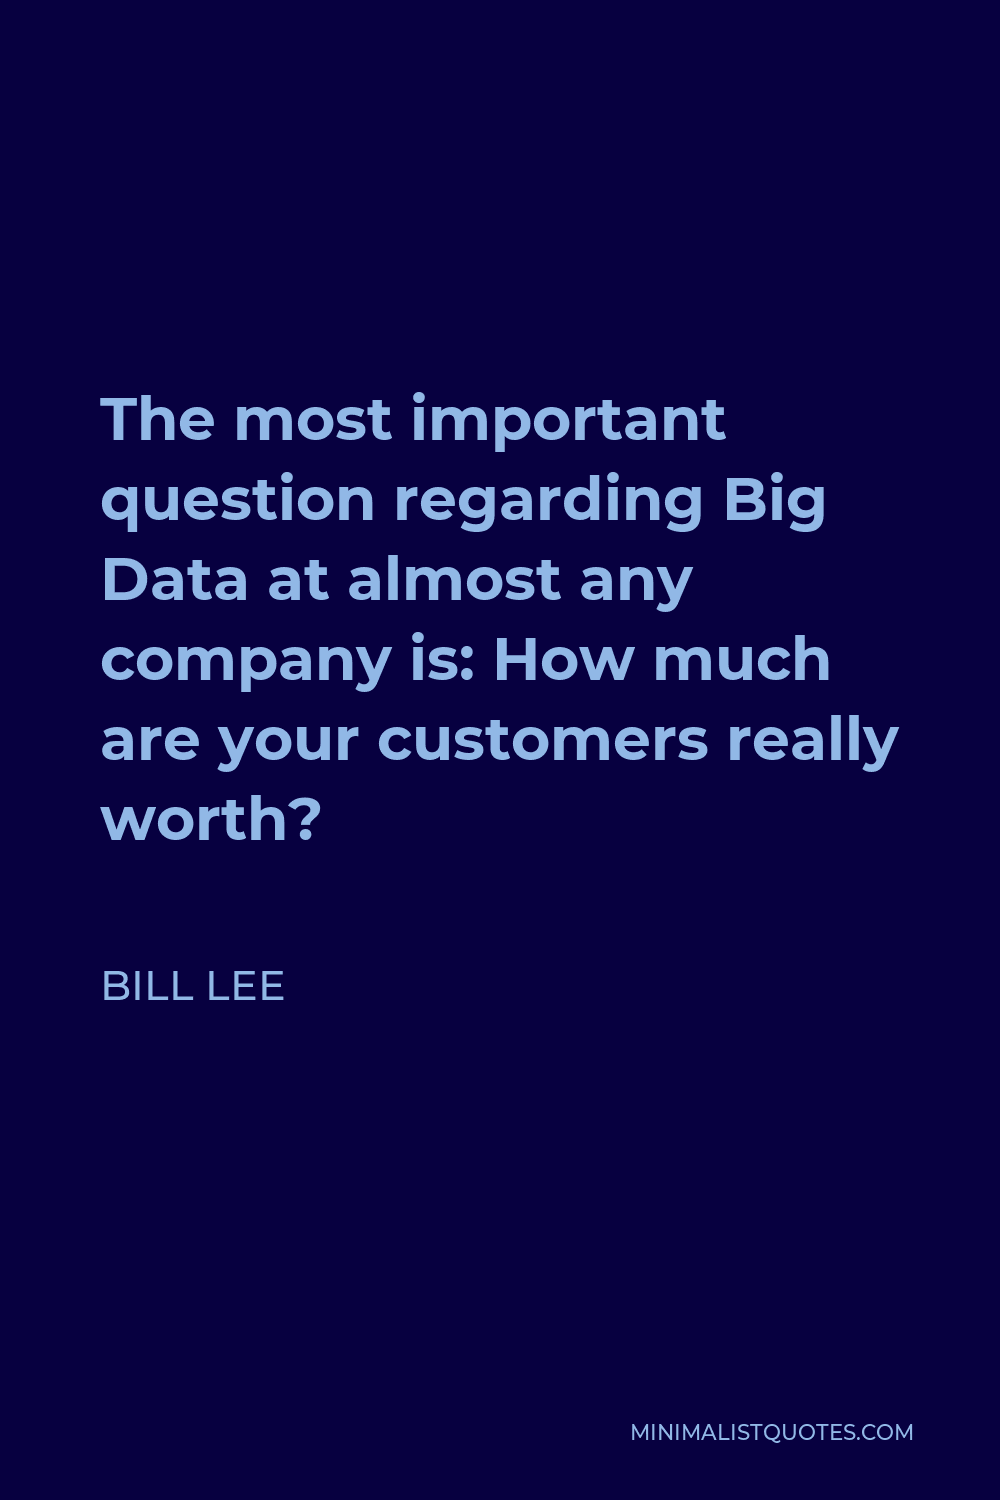 Bill Lee Quote - The most important question regarding Big Data at almost any company is: How much are your customers really worth?